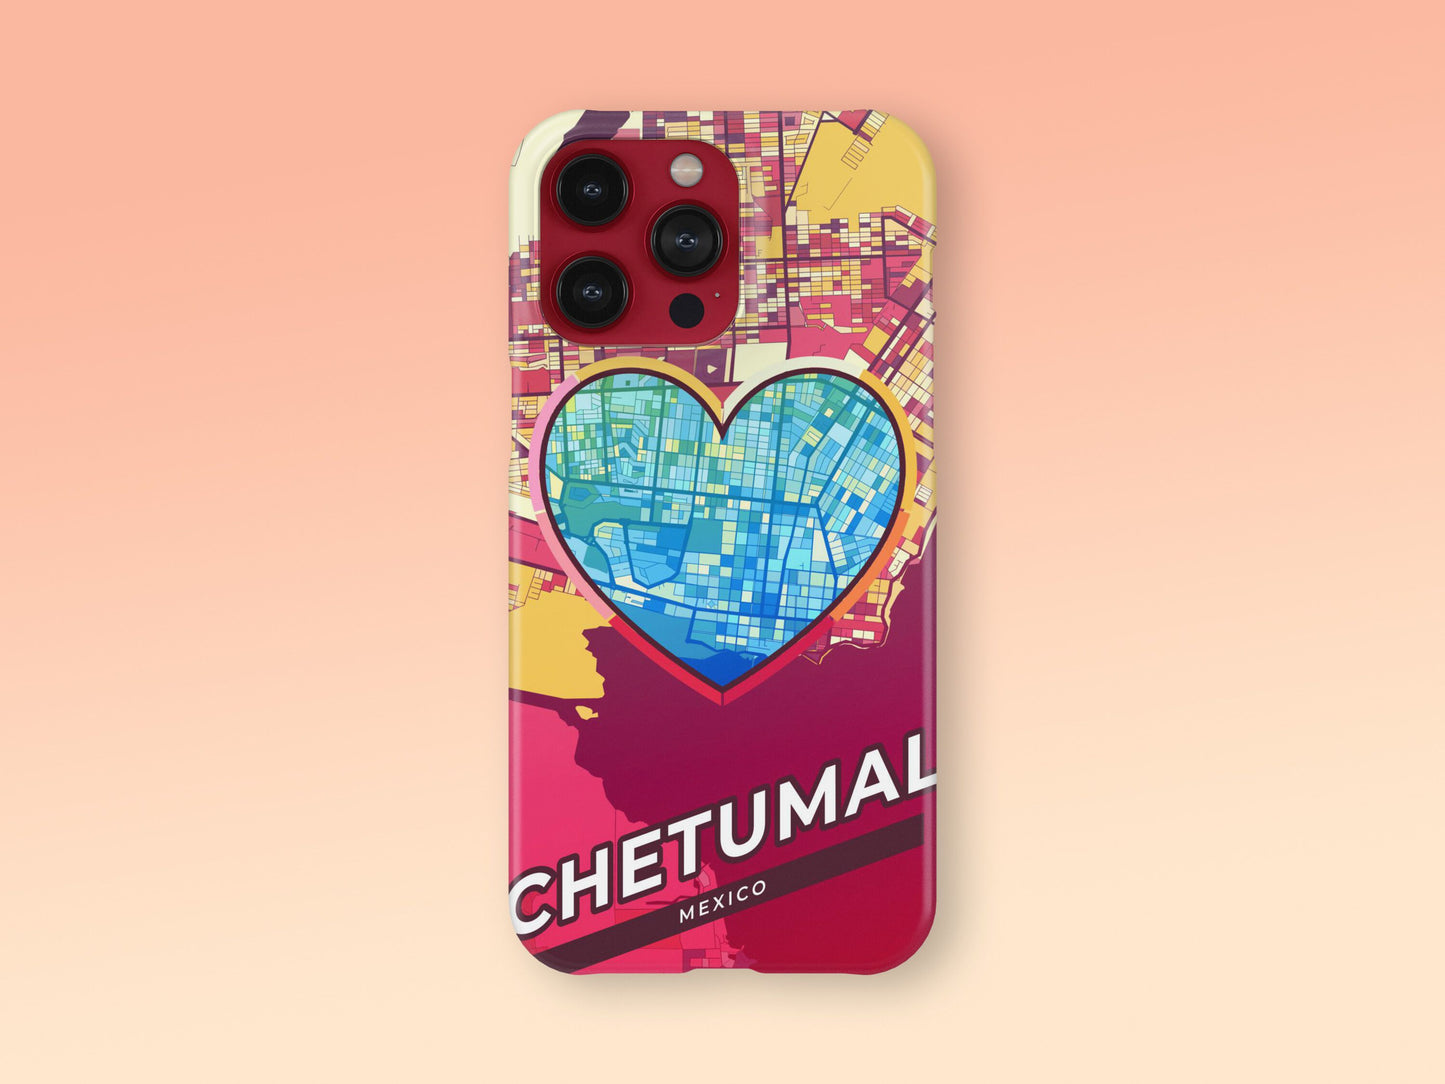 Chetumal Mexico slim phone case with colorful icon. Birthday, wedding or housewarming gift. Couple match cases. 2